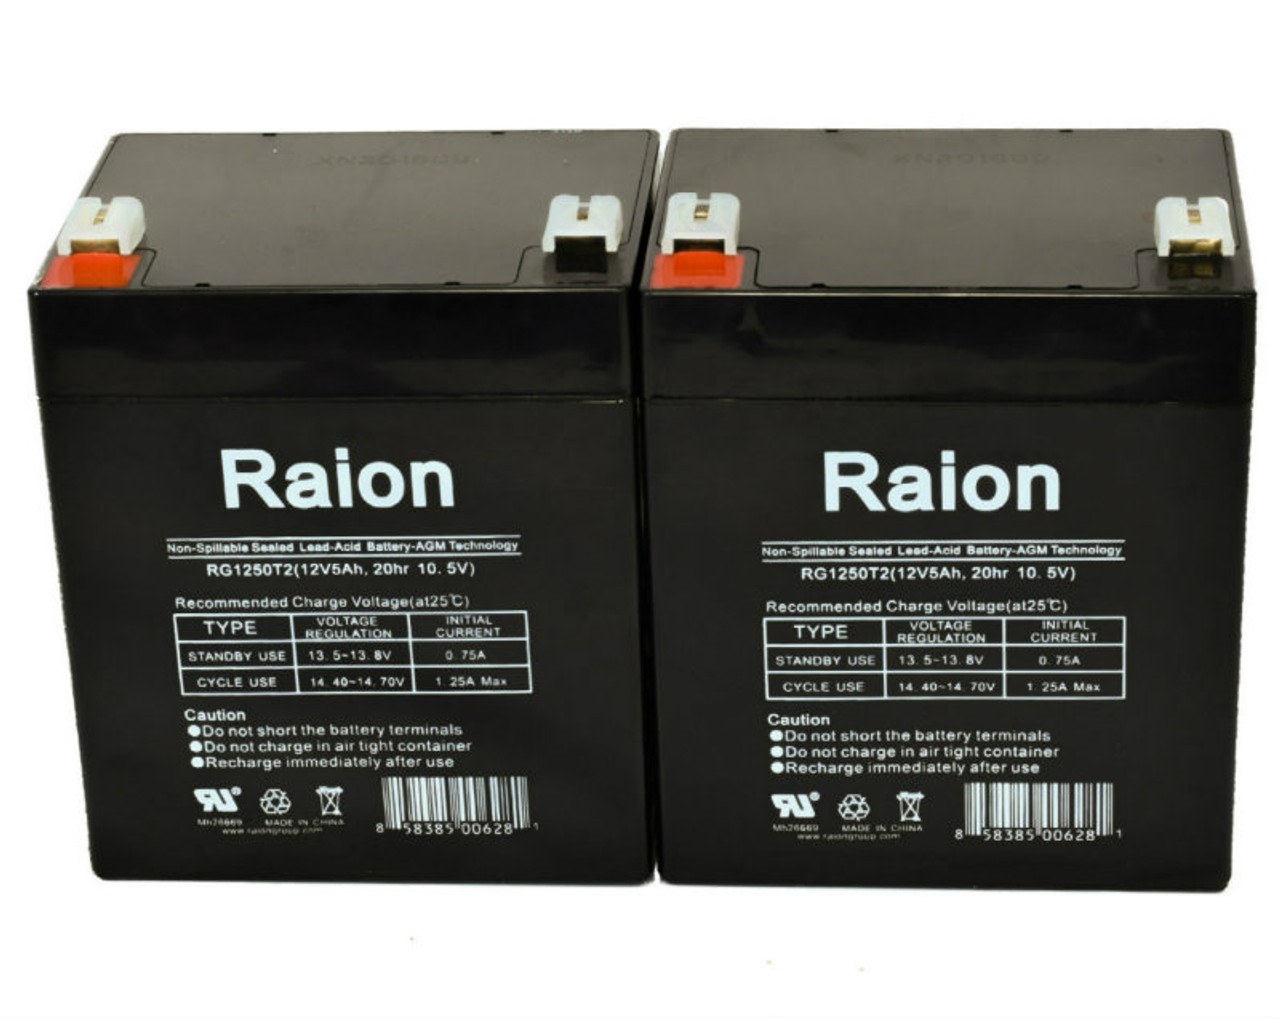 Raion Power RG1250T1 Replacement Fire Alarm Control Panel Battery for Napco Alarms MA1000E4LB PAK - 2 Pack